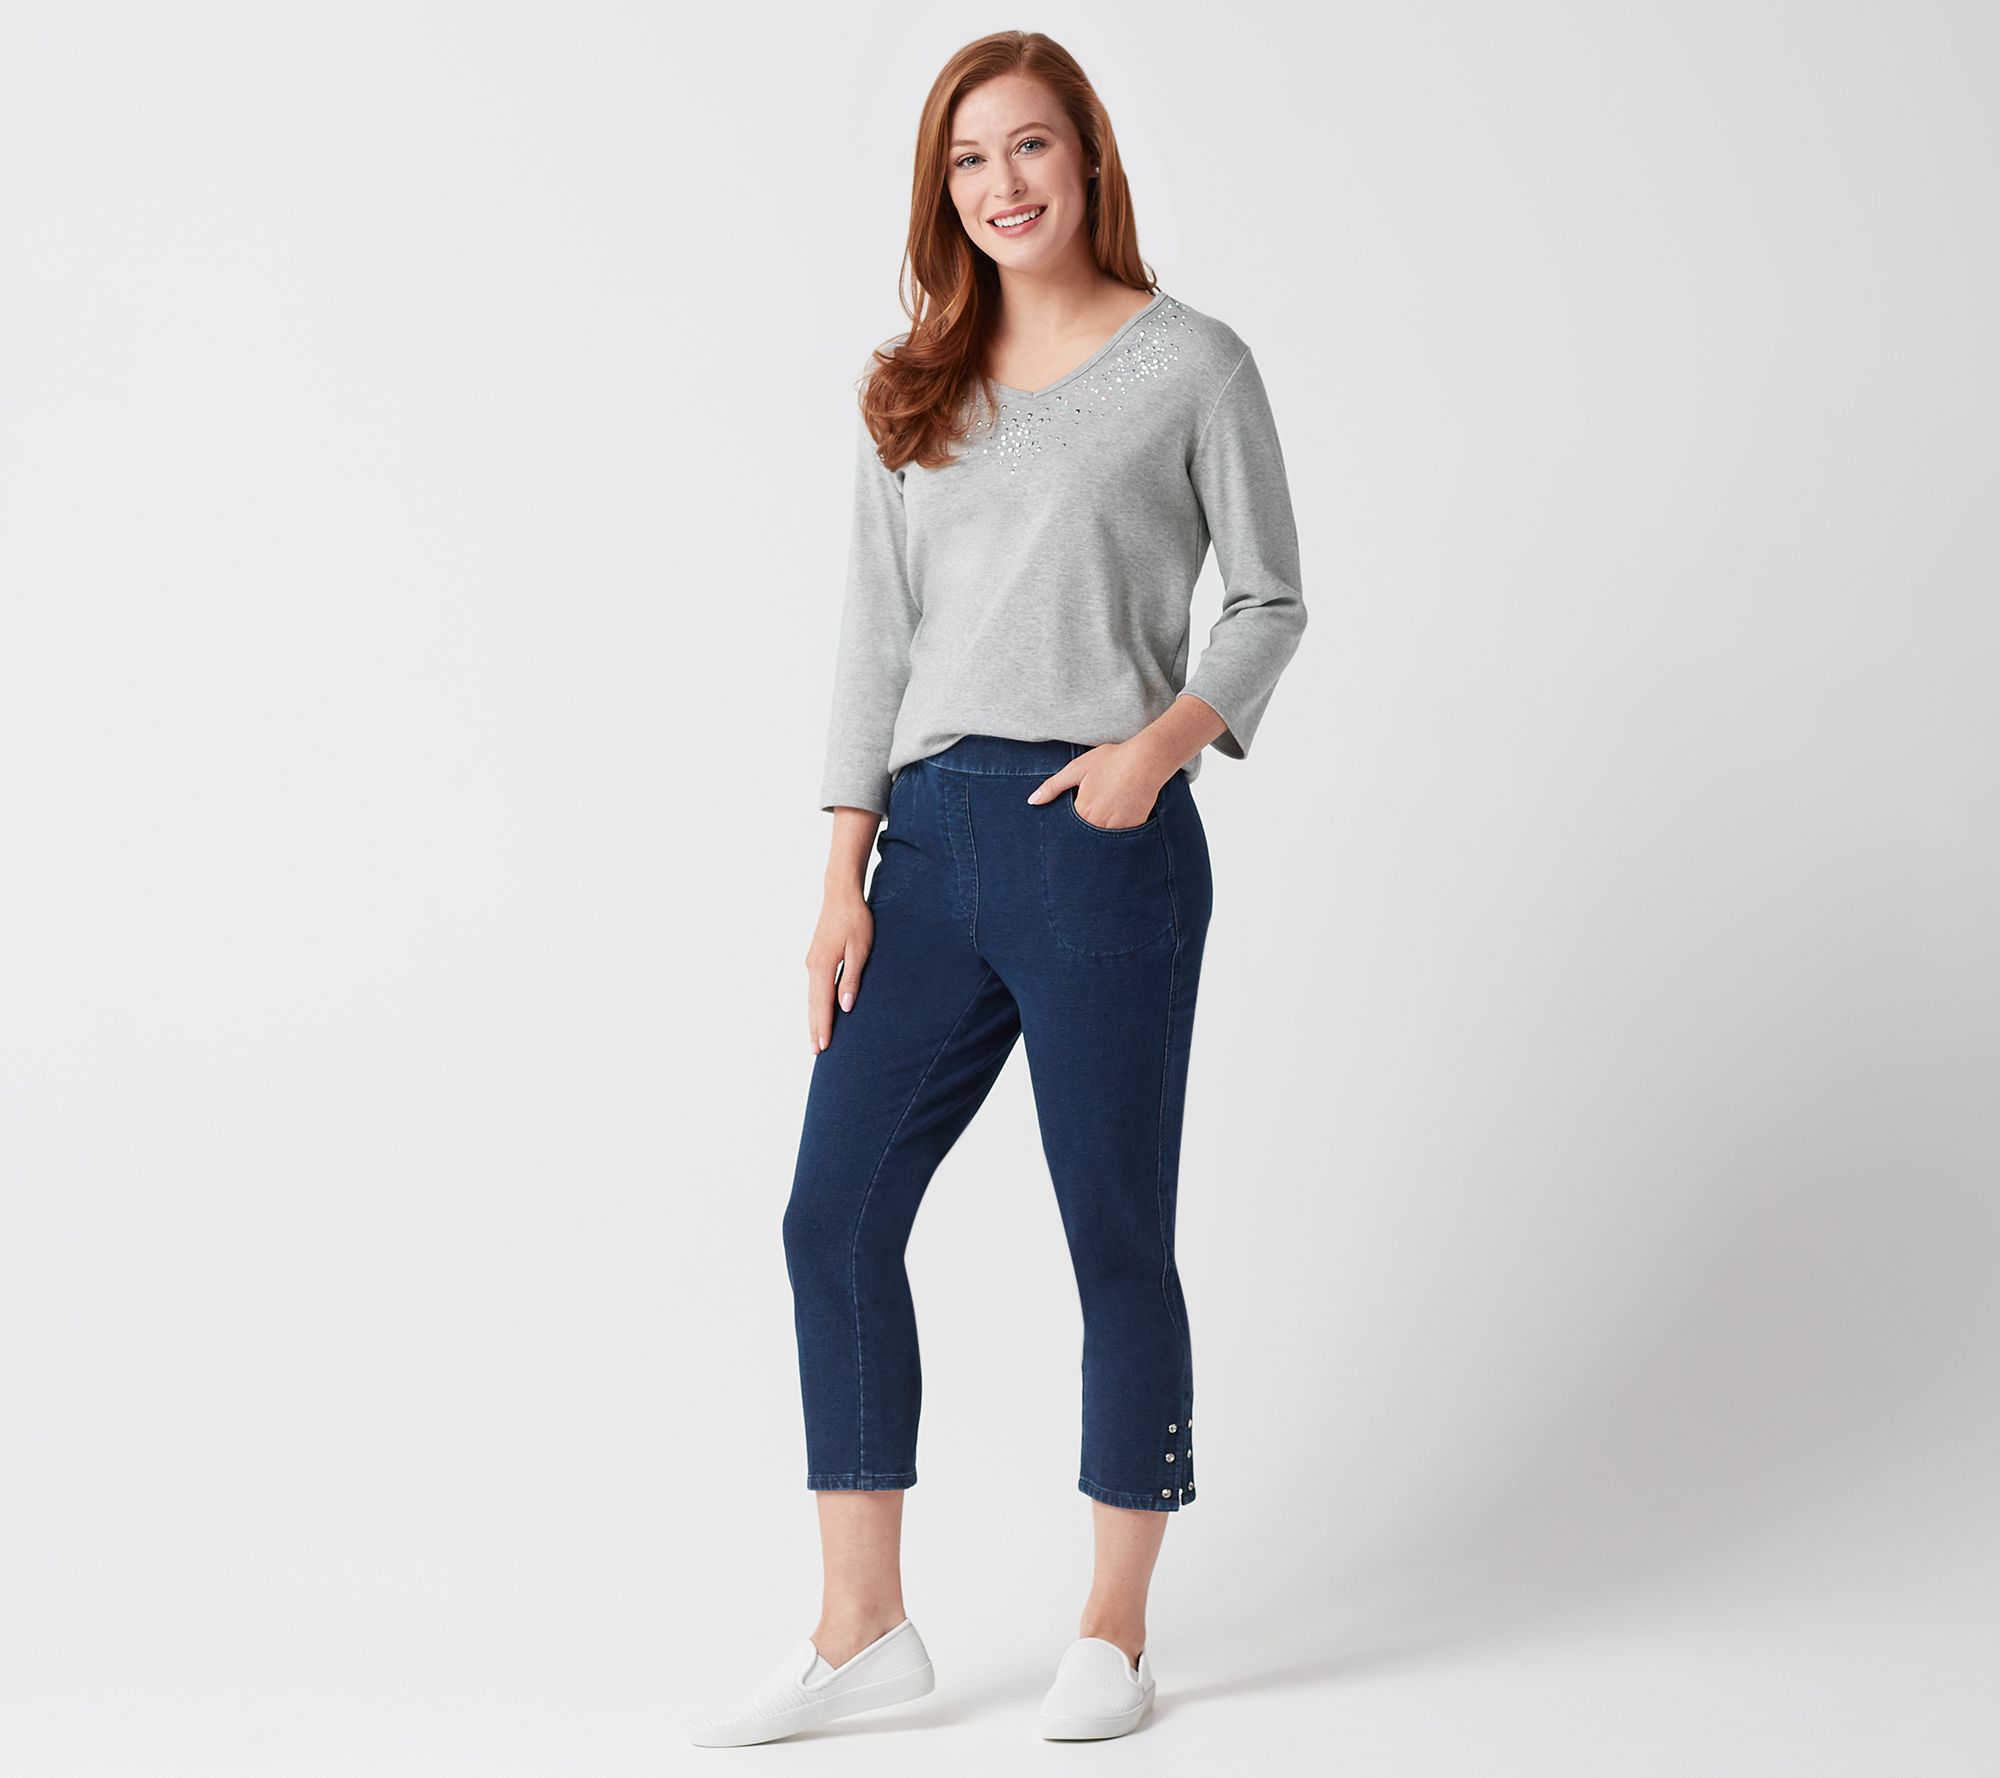 Quacker Factory DreamJeannes Pull-On Crop Pants with Bling Stones - QVC.com